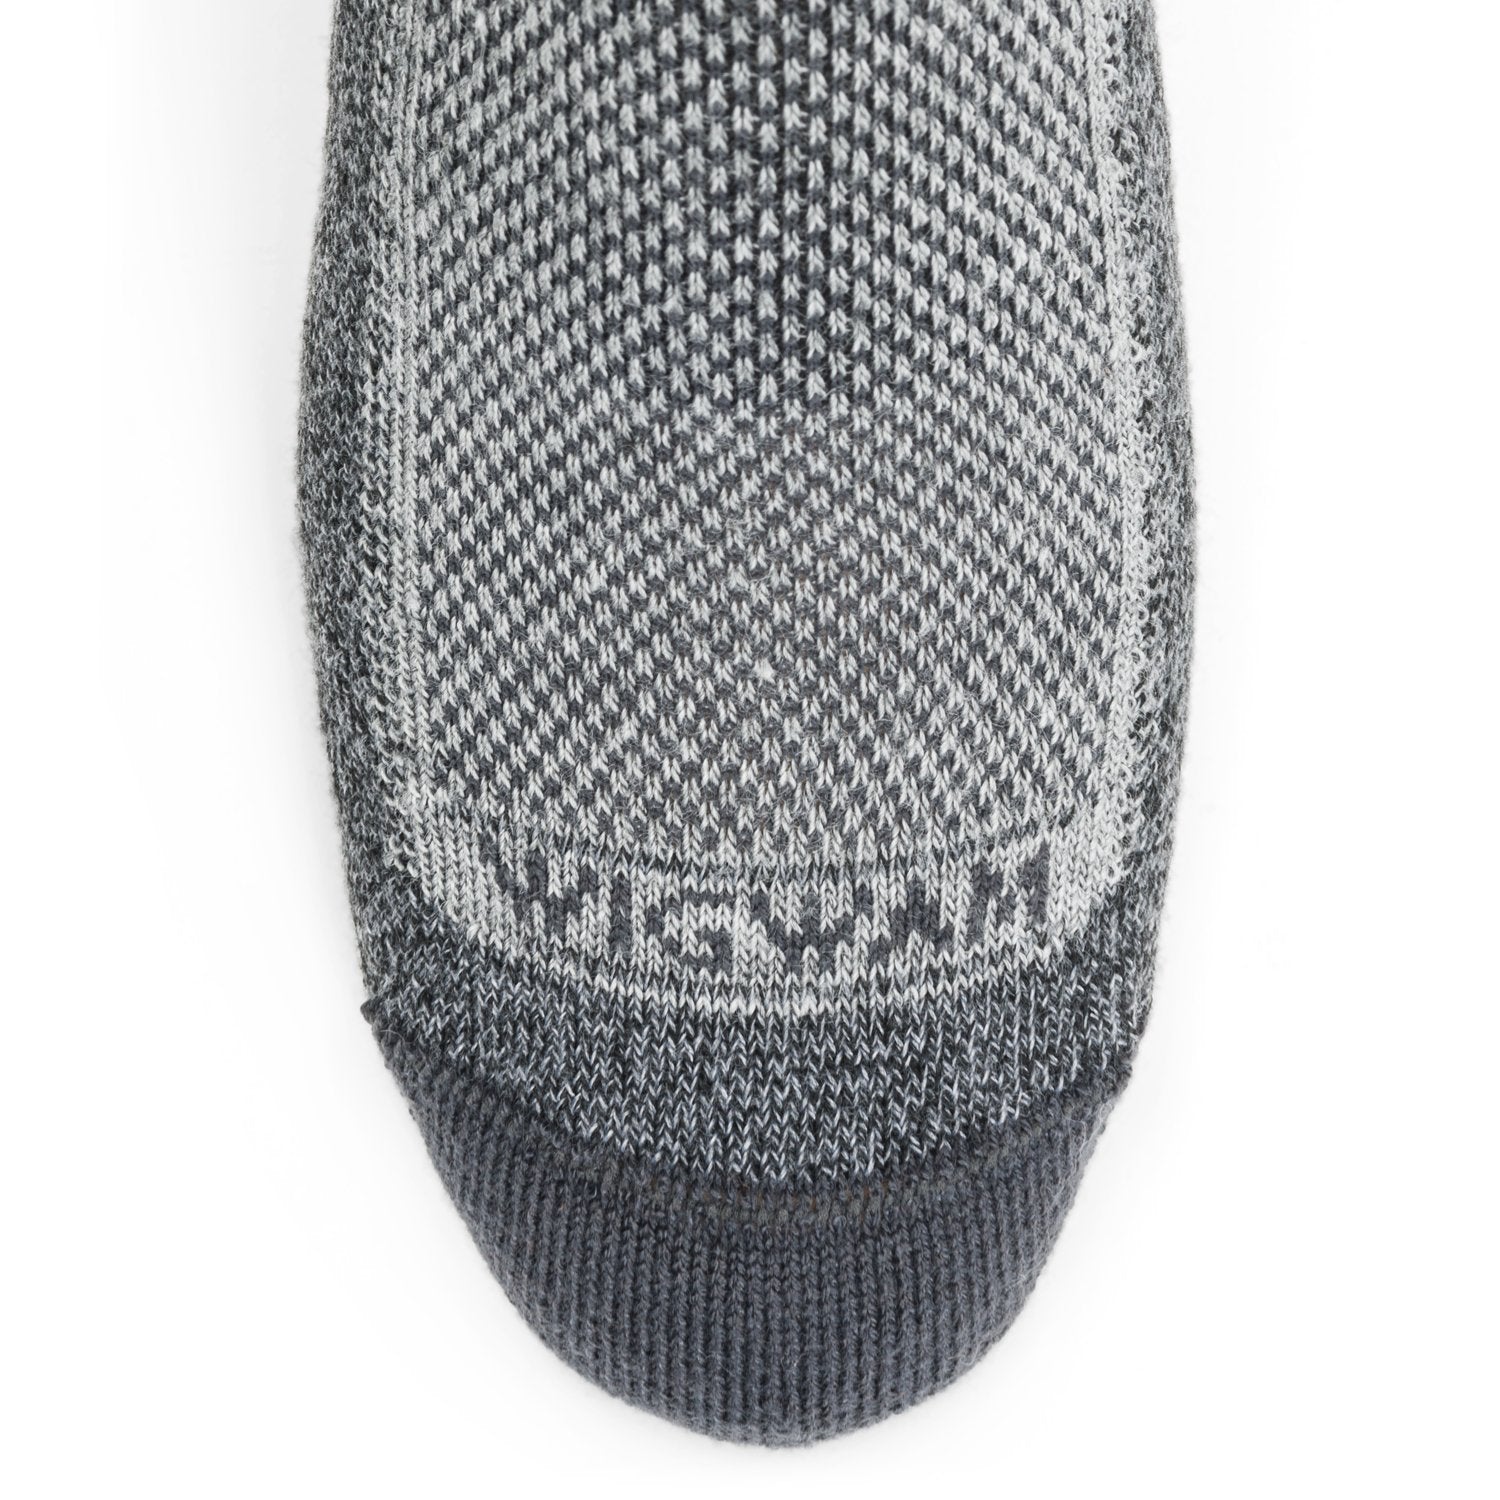 Cool-Lite Hiker Quarter Midweight Sock - Grey/Charcoal toe perspective - made in The USA Wigwam Socks